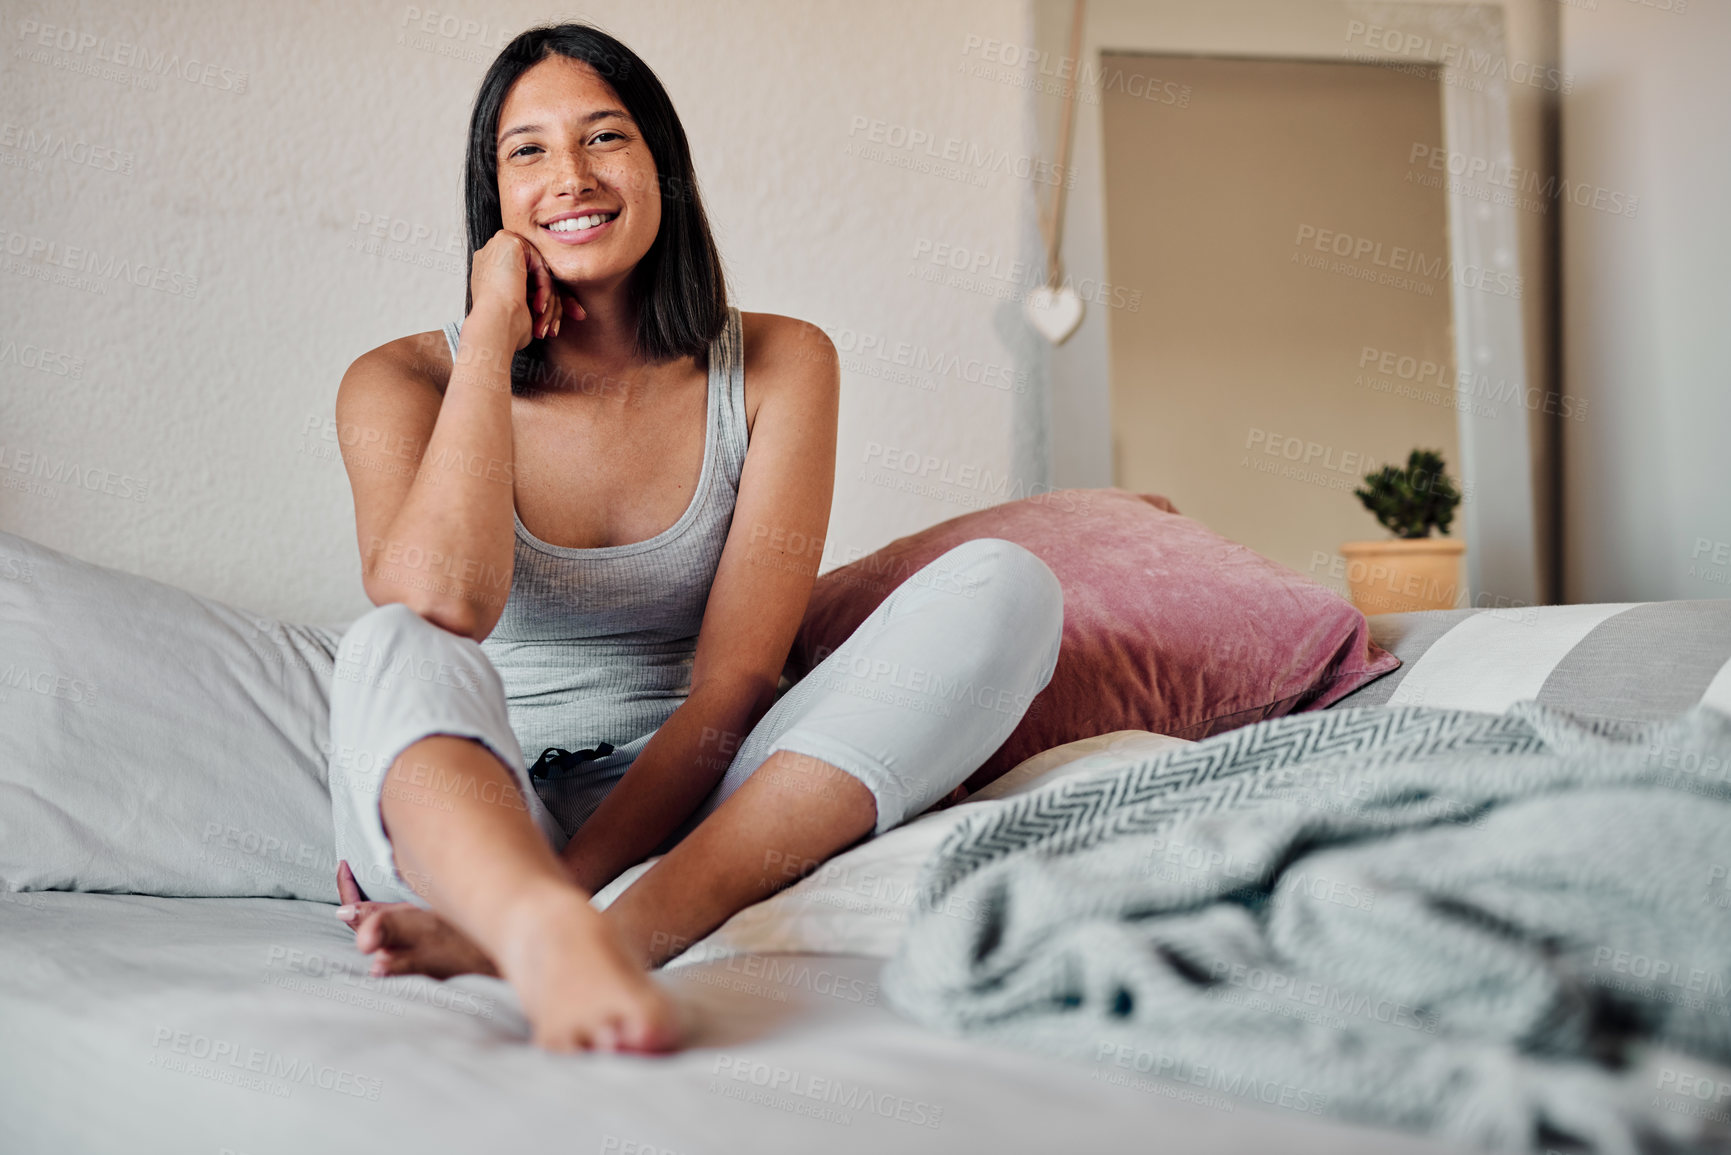 Buy stock photo Shot of a young woman relaxing on her bed in the morning at home